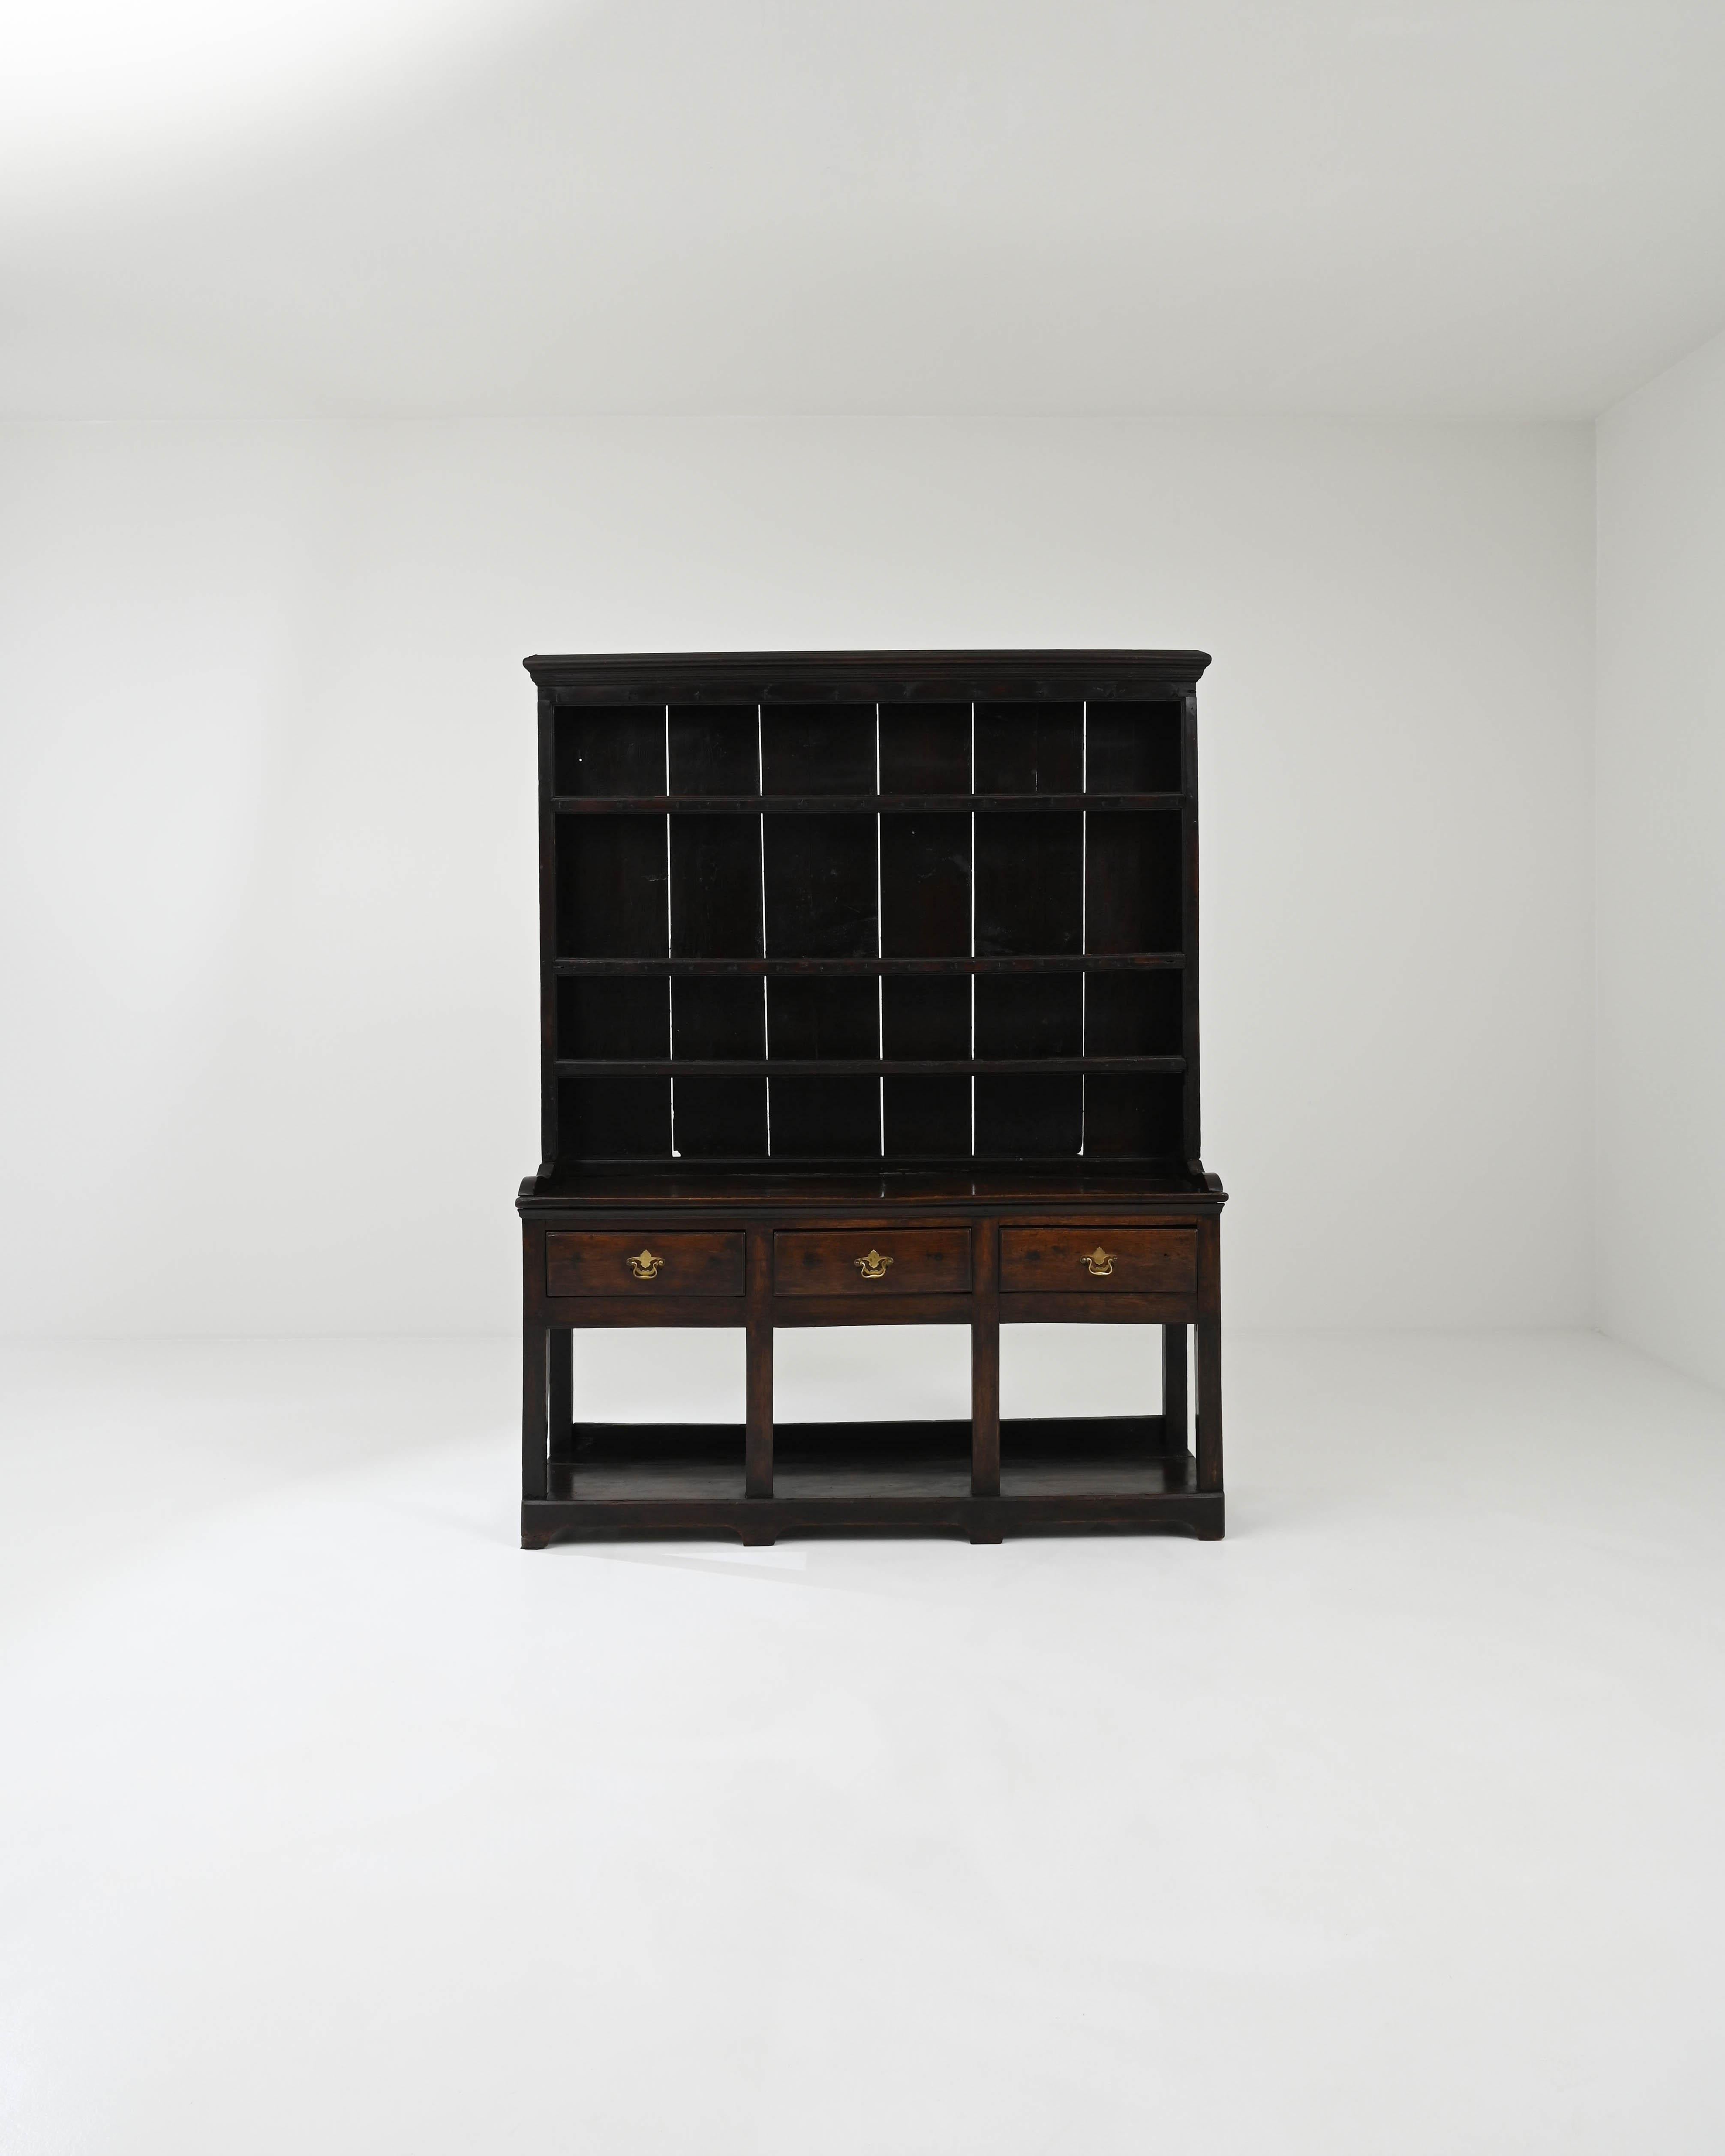 A wooden cupboard created in early 19th century England. Dark and dramatic, this country cupboard exudes a sense of history and traditional beauty and eloquence. The dark glowing, moody hardwood emits a curious luster, which bonds in tasteful